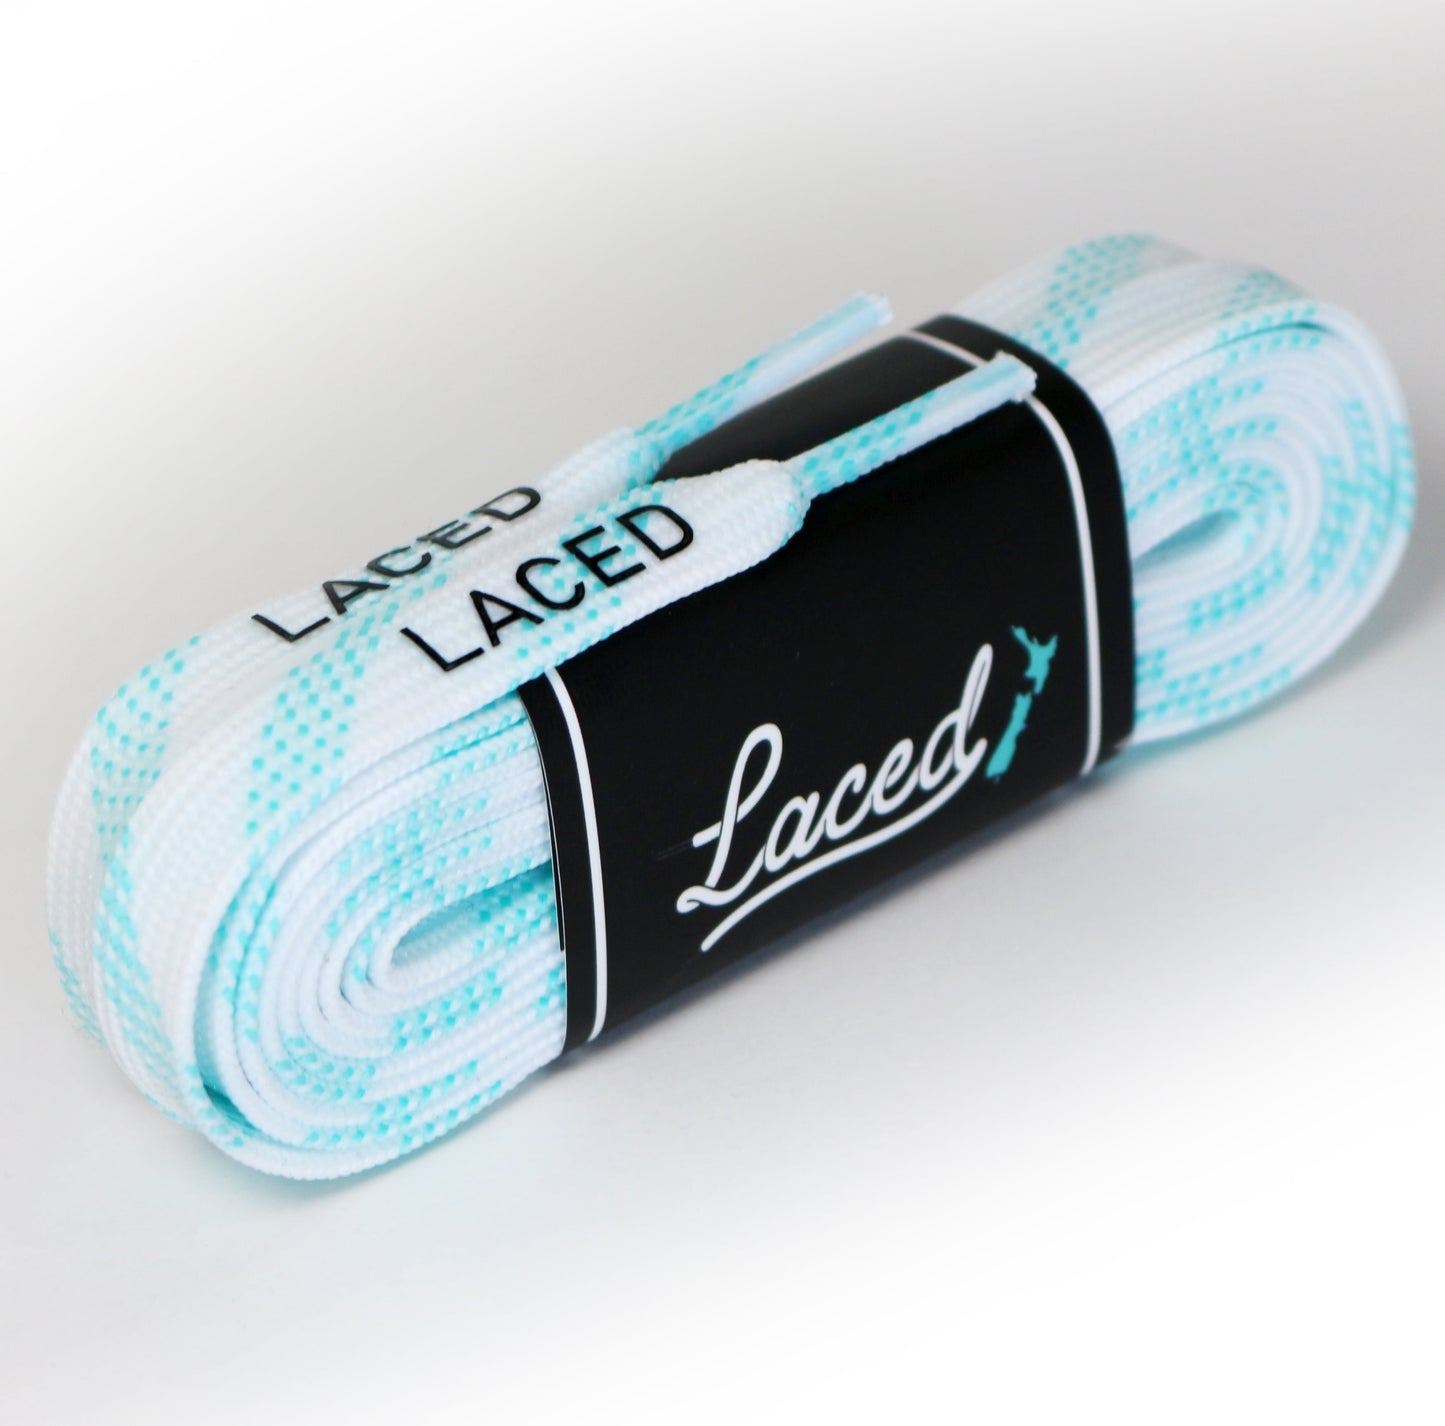 Laced Waxed Laces - White & Mint